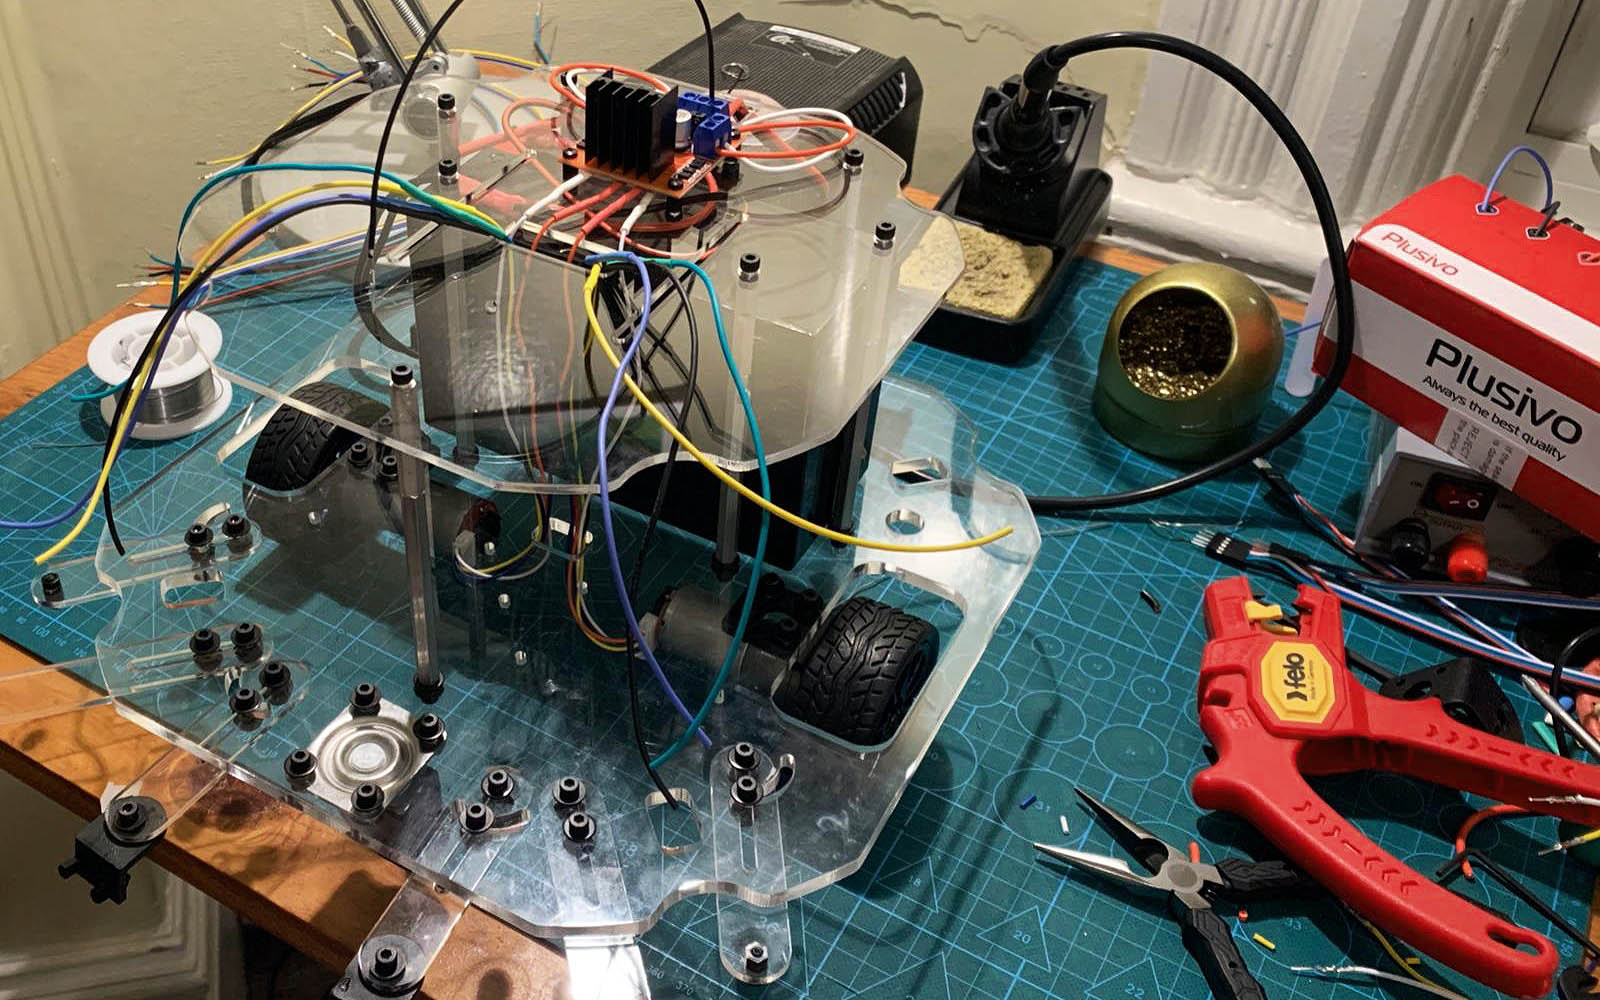 A partially assembled robot with wheel and wires hanging out, alongside soldering tools